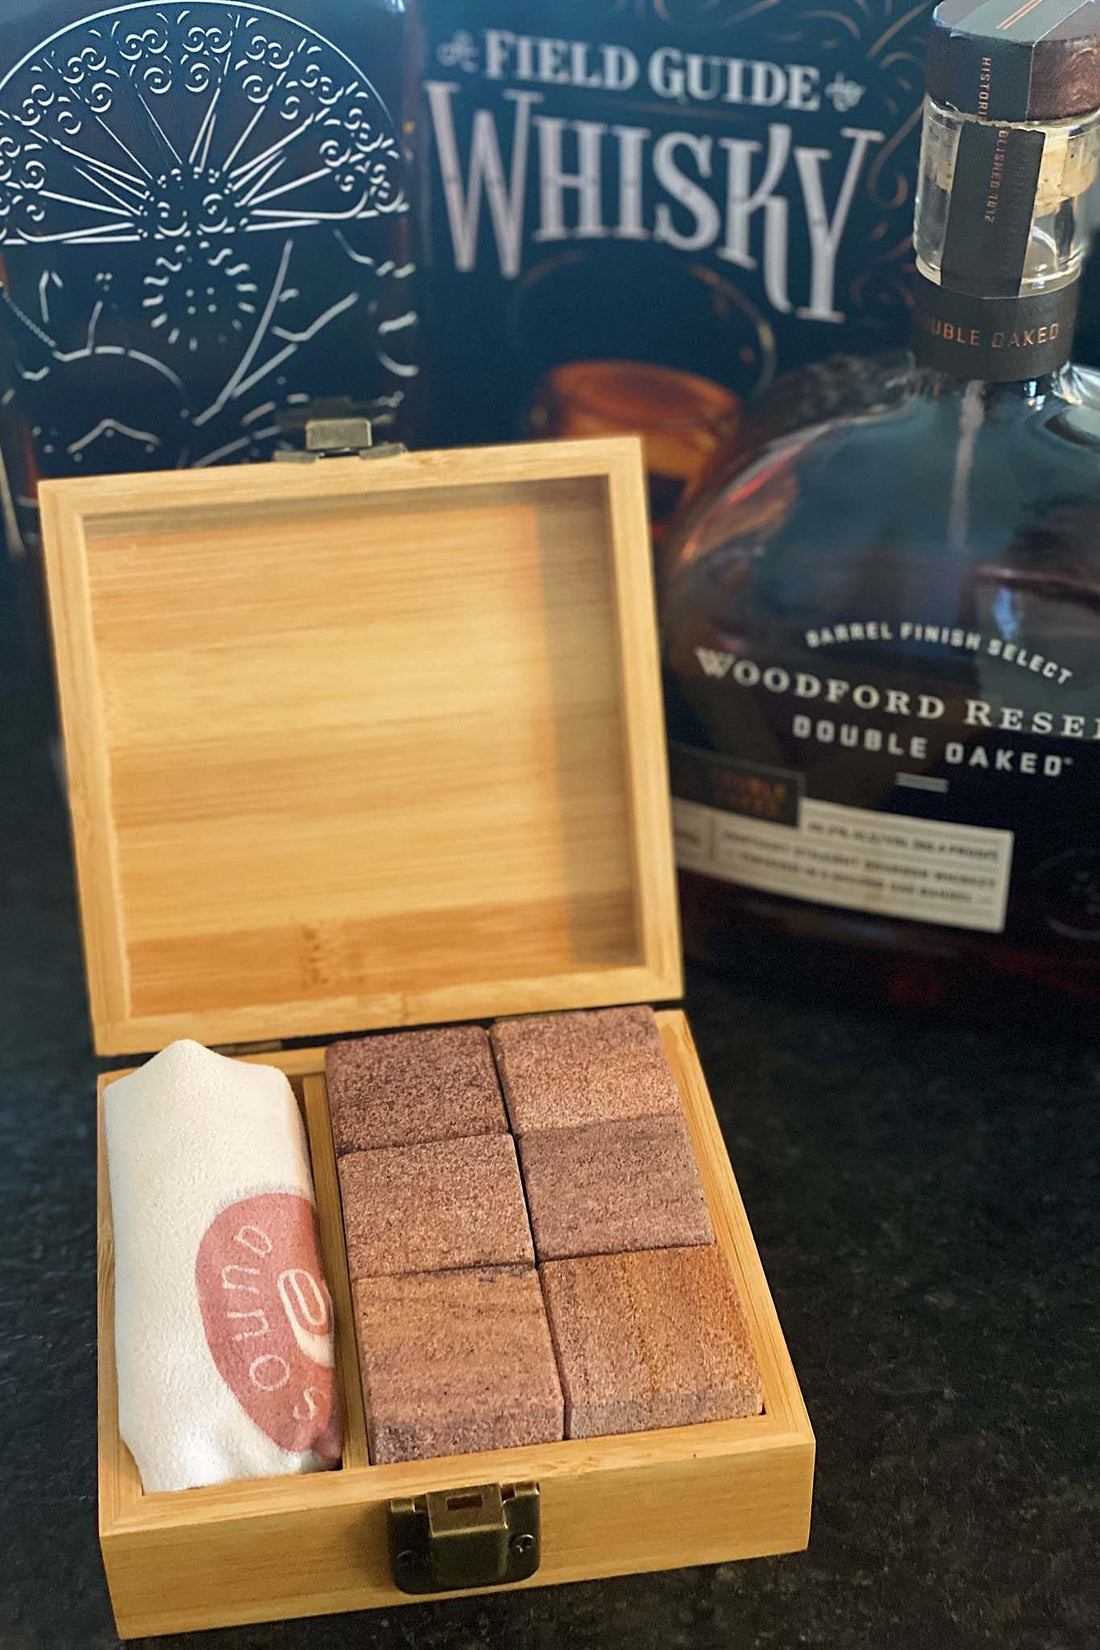 Whiskey stone set with six cubic stones made from light pink or tan desert striped quartz inside a wood box and with a bag featuring the Sound As Ever logo